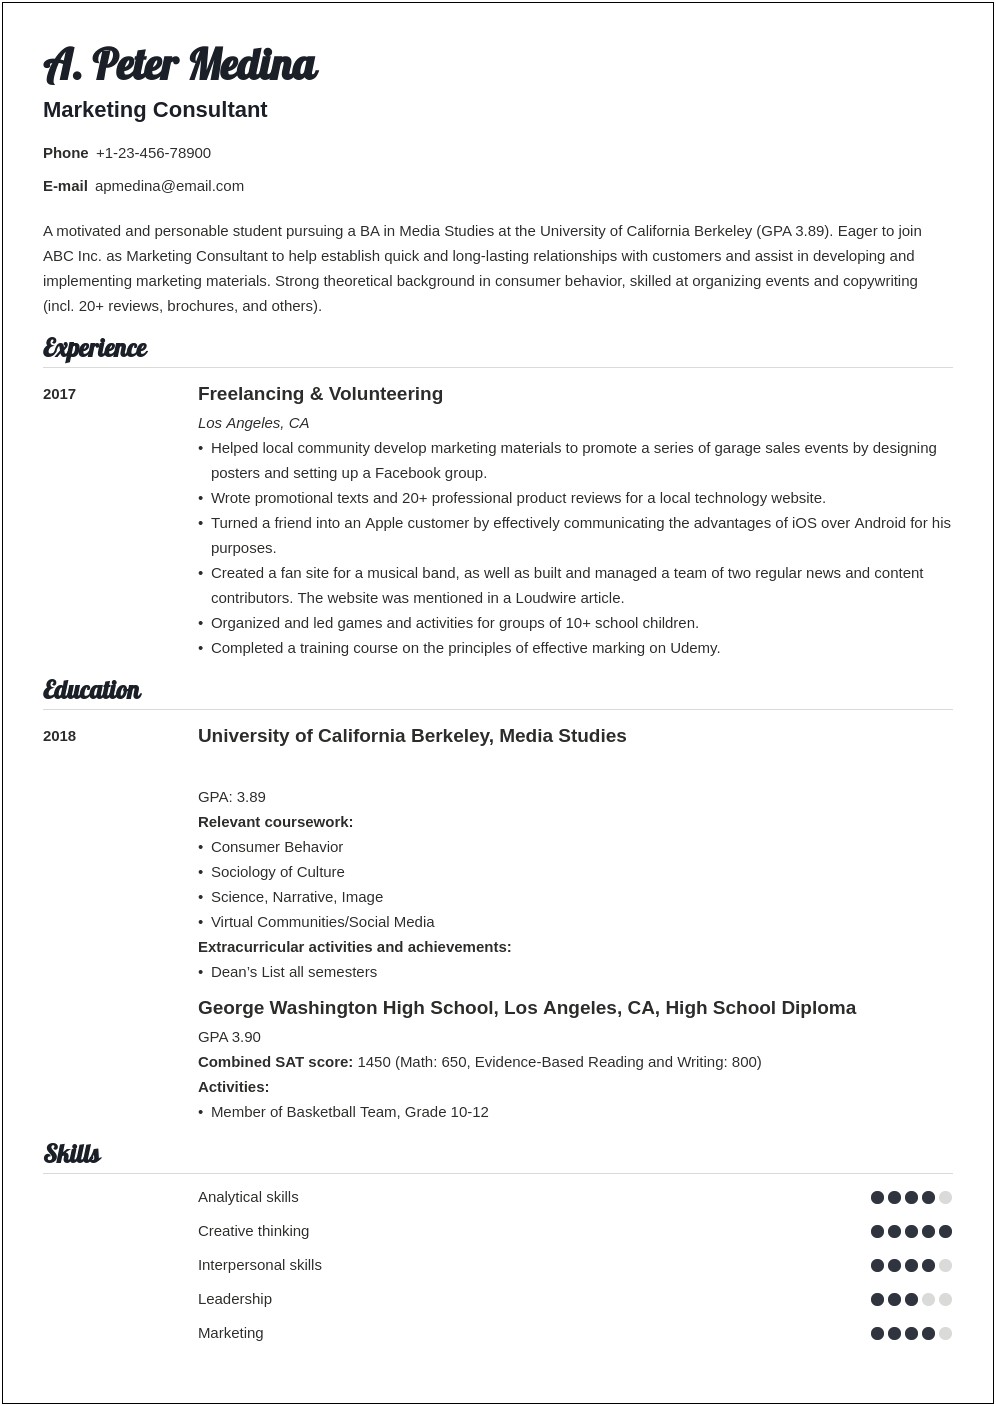 Resume Headeline For Someone Without Much Experience